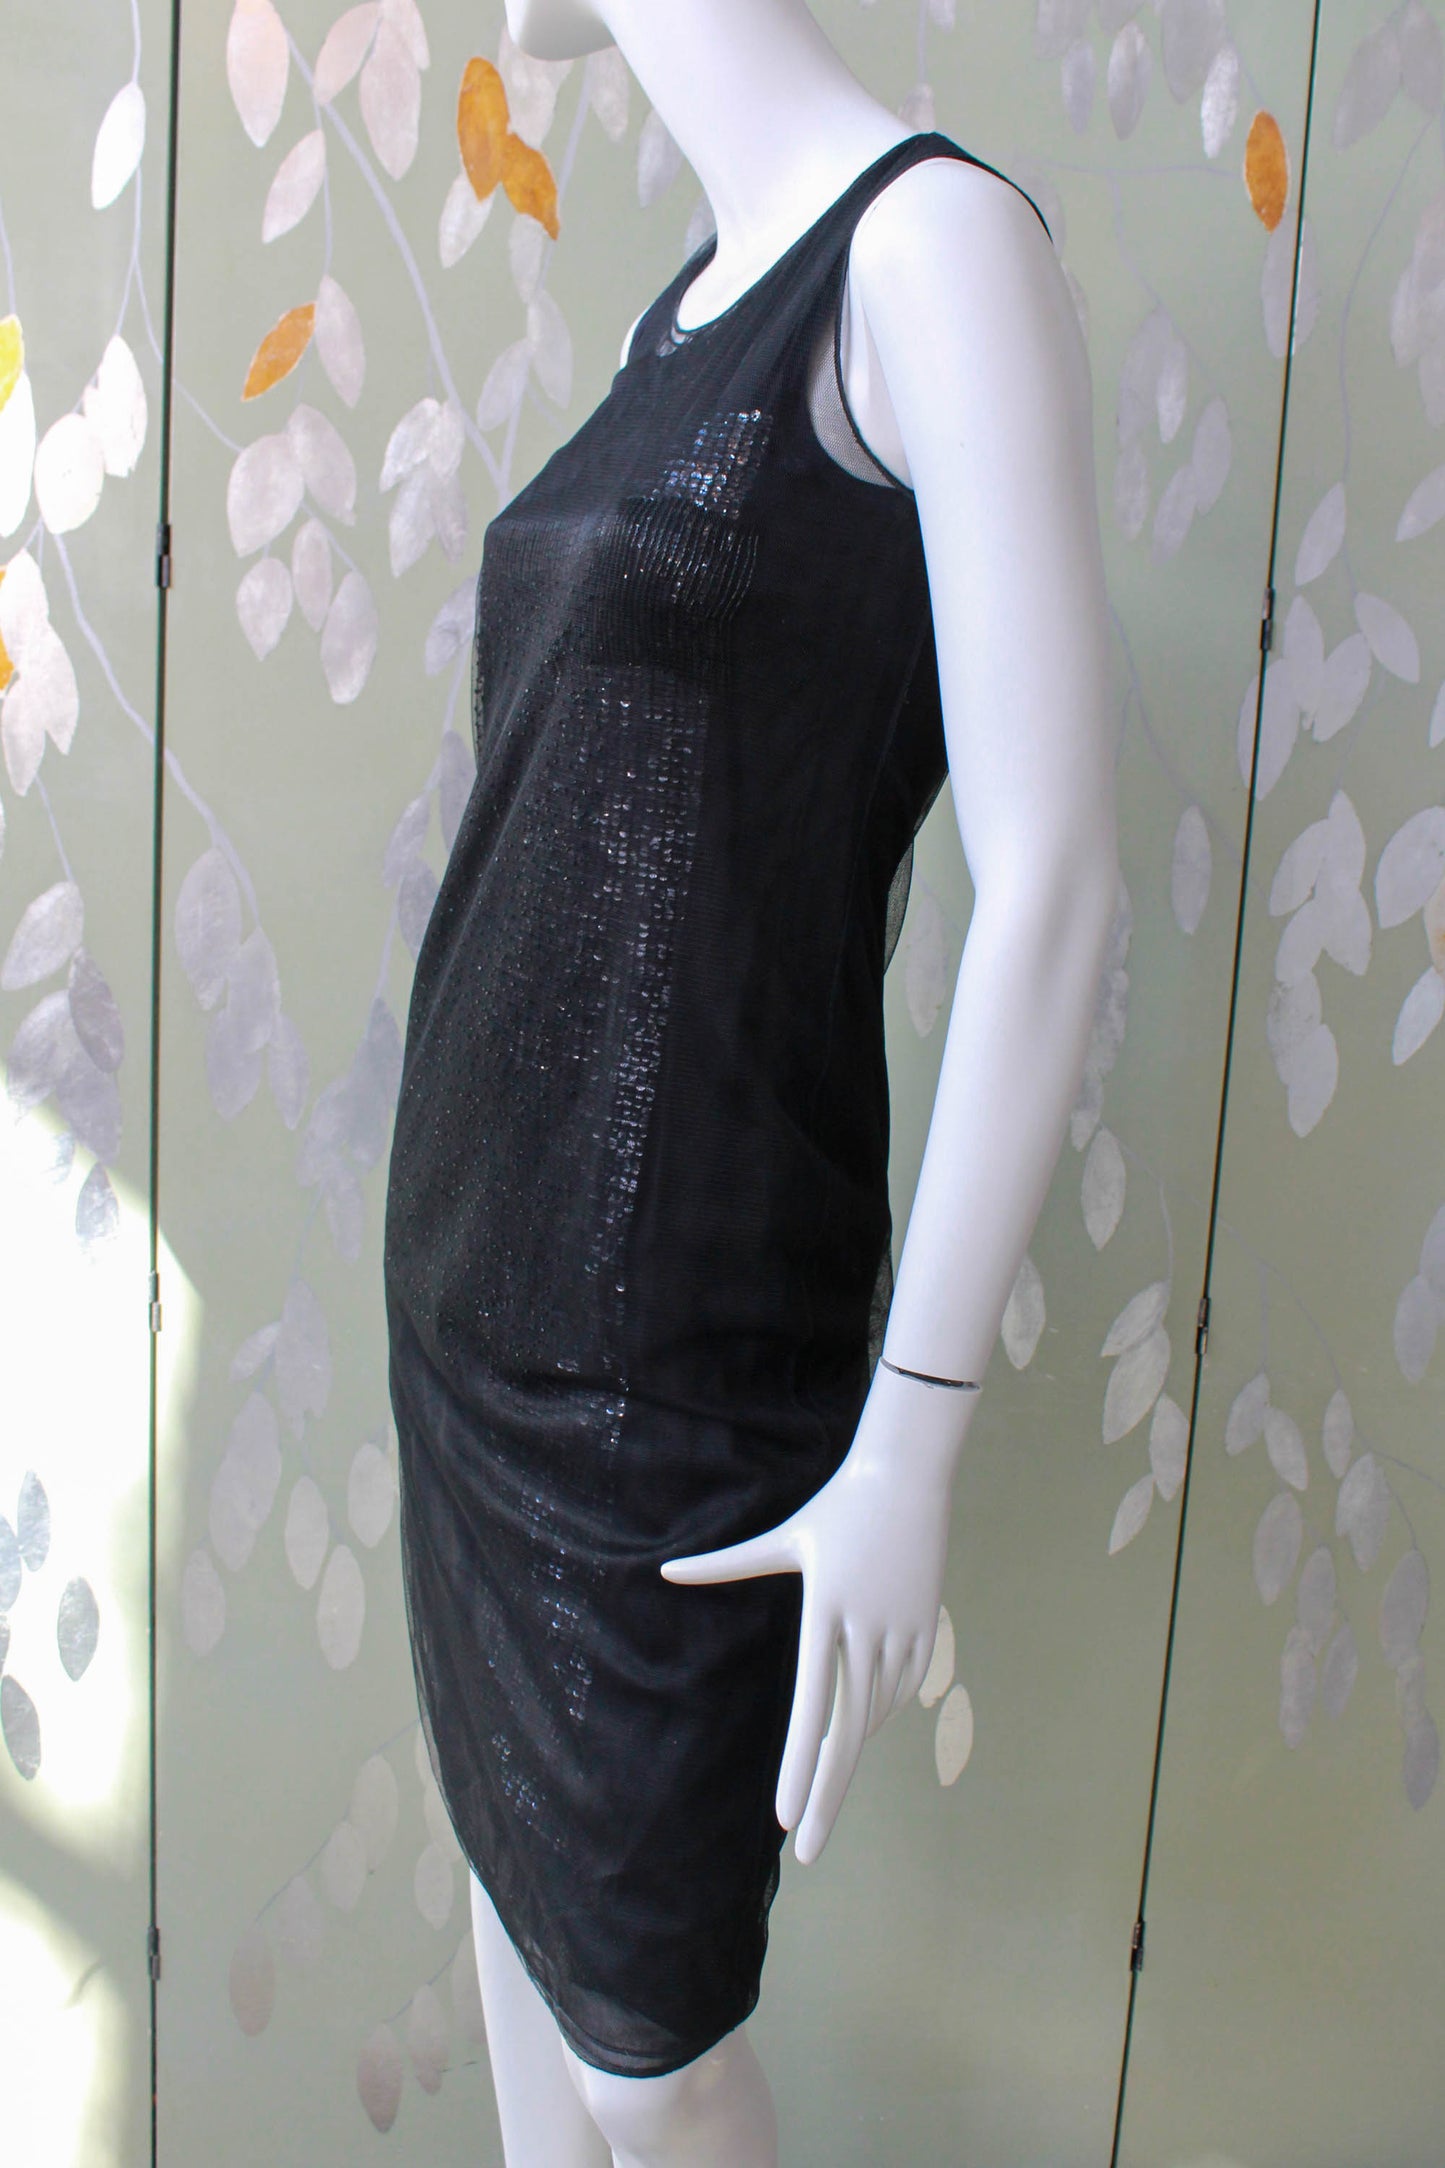 Donna Karan Signature y2k tank top dress with chiffon and tulle beaded sheer layers over solid black silver sequinned jersey layer